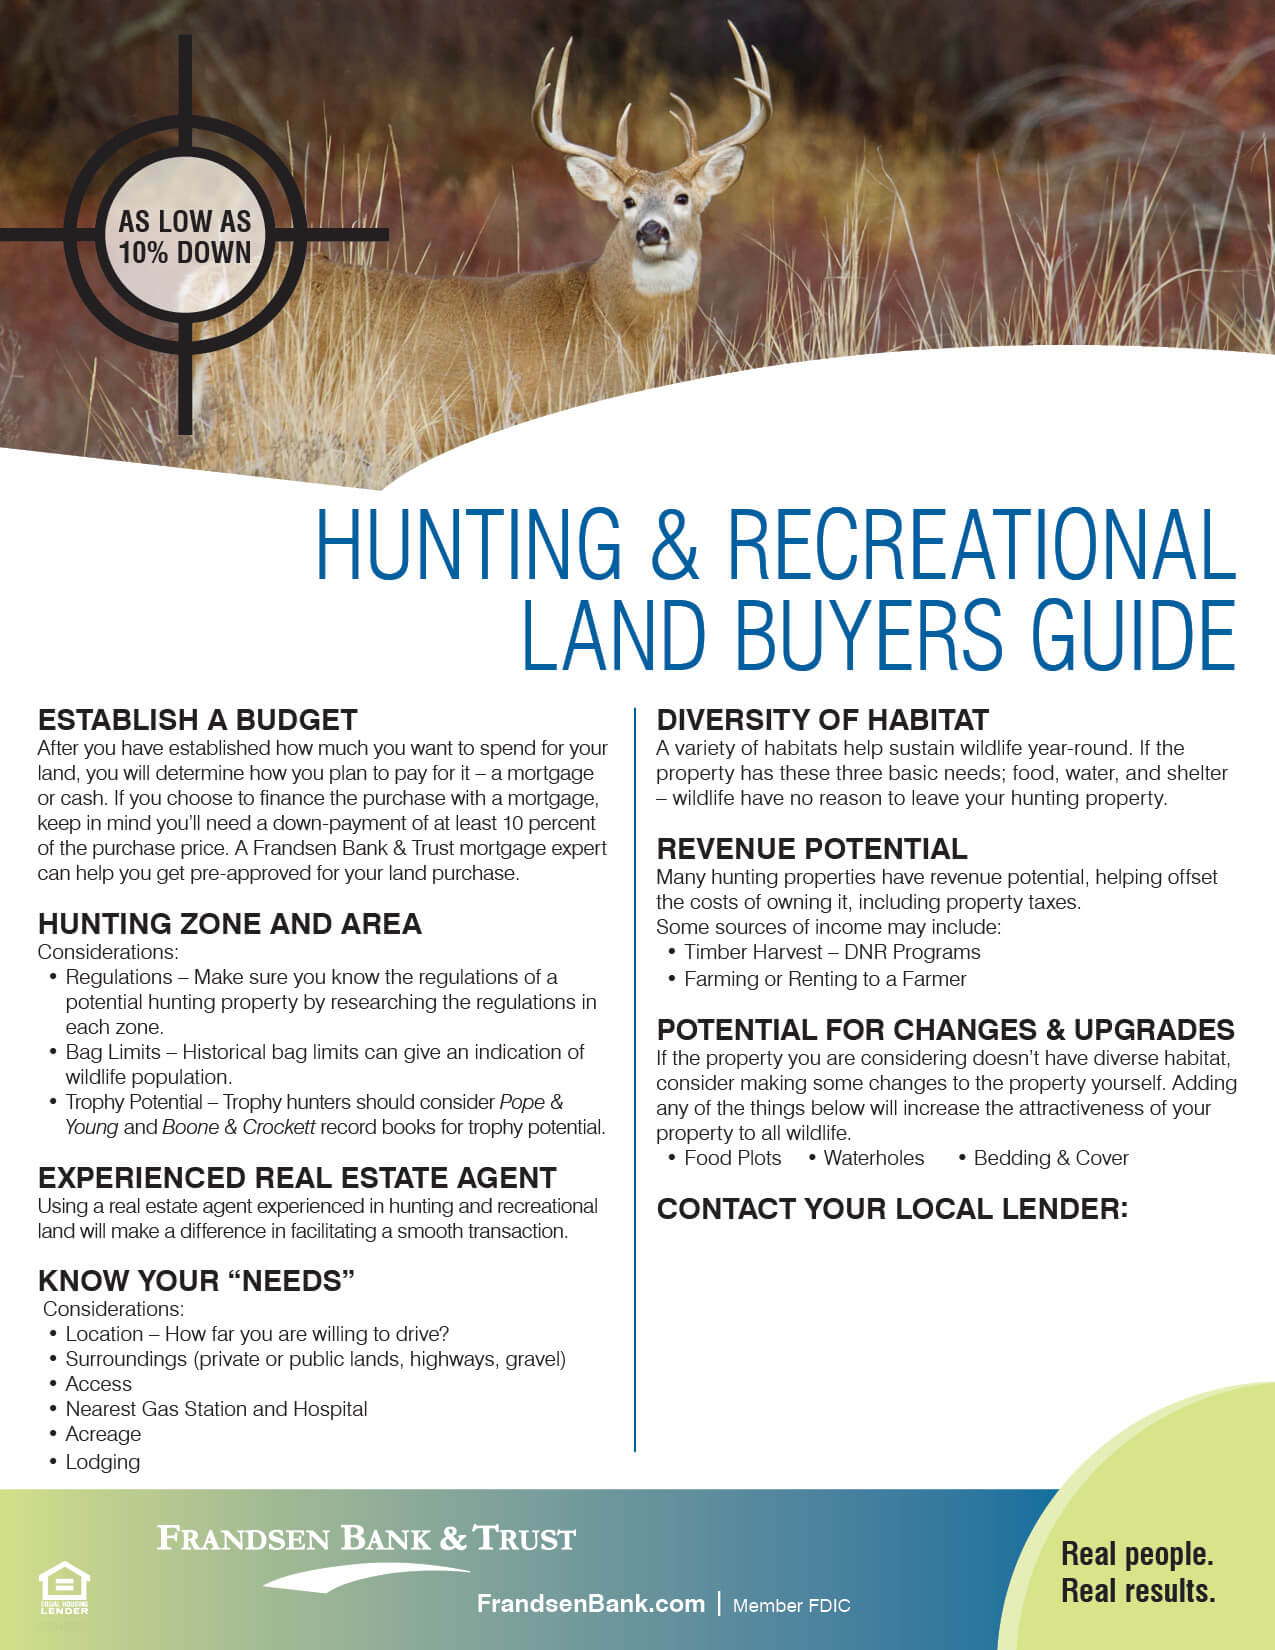 Hunting & Recreational Land Buyers Guide